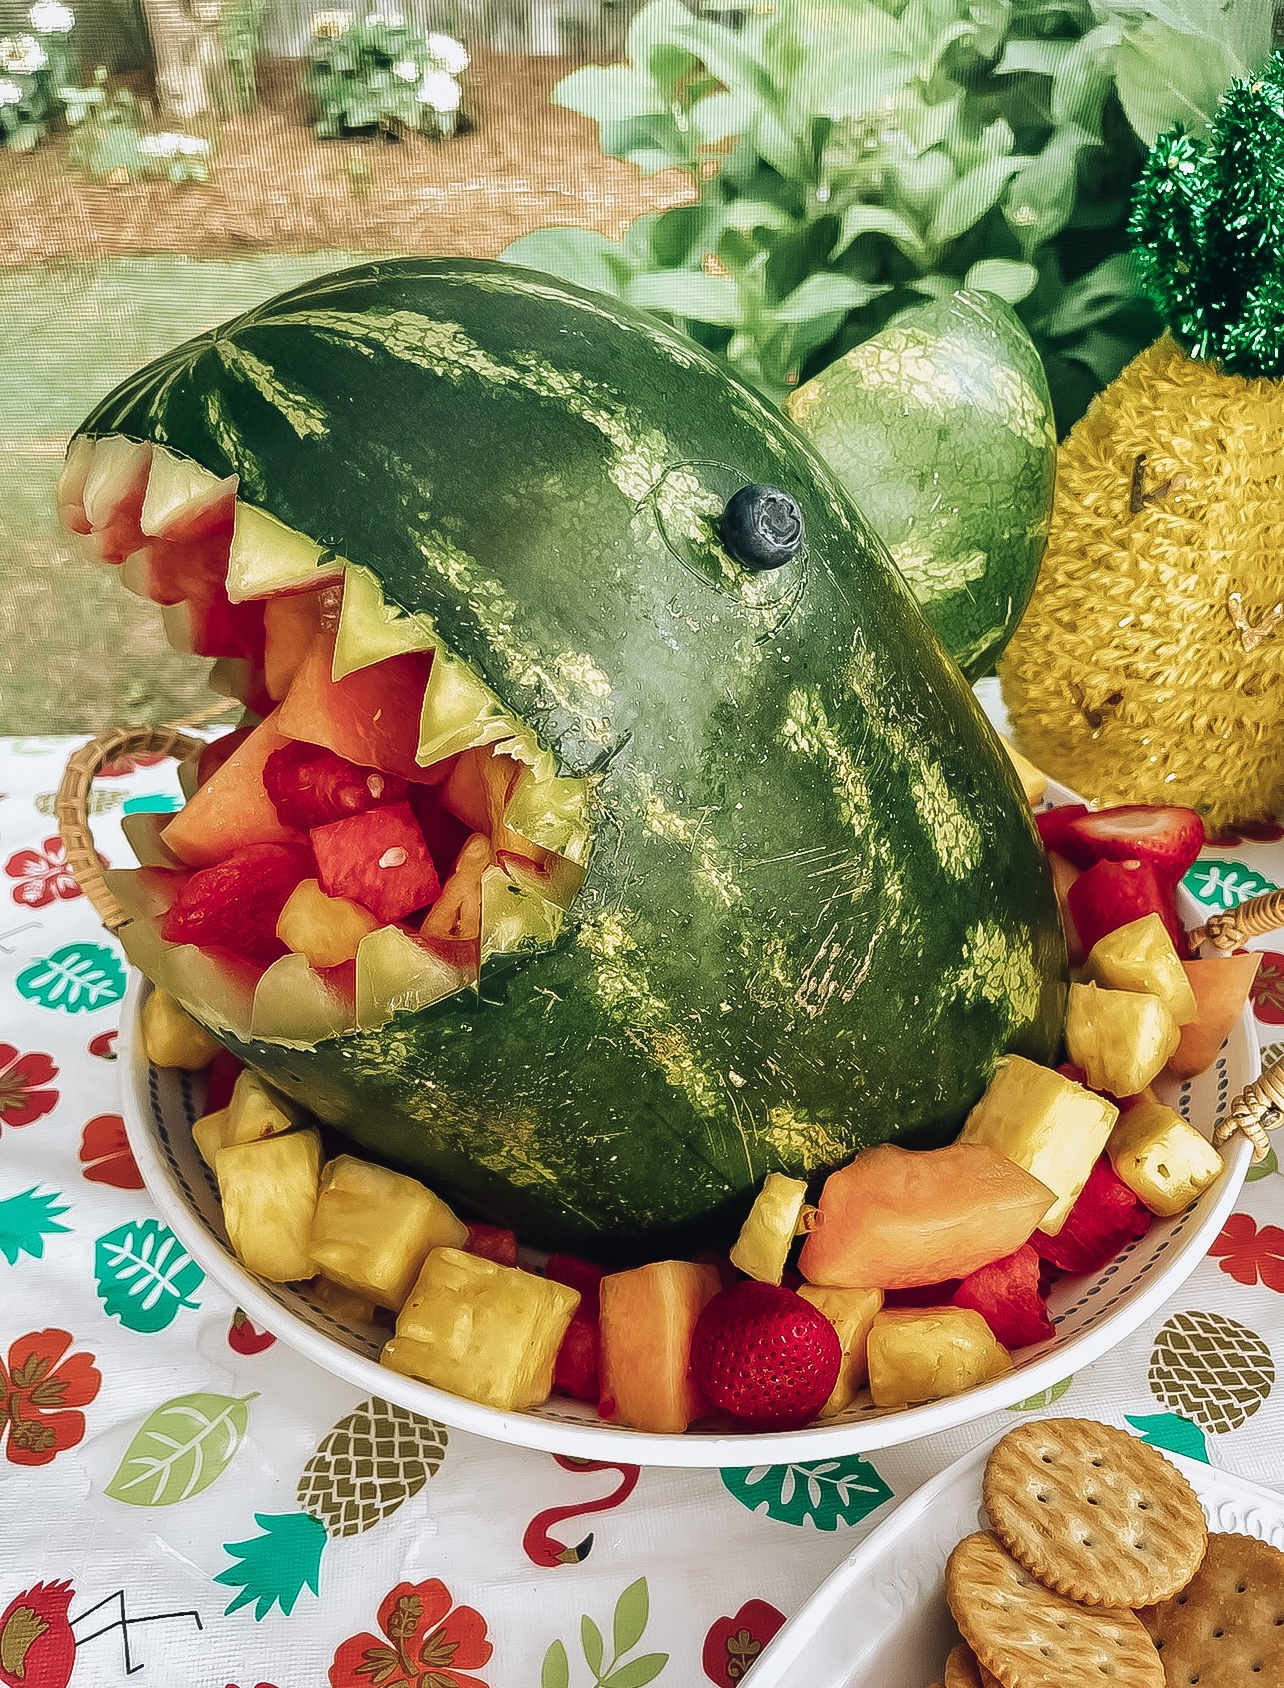 Jimmy Buffet Party + Summer Cookout Sides - Something Delightful Blog #summerparty #jimmybuffettparty #cookoutsides #july4thfood